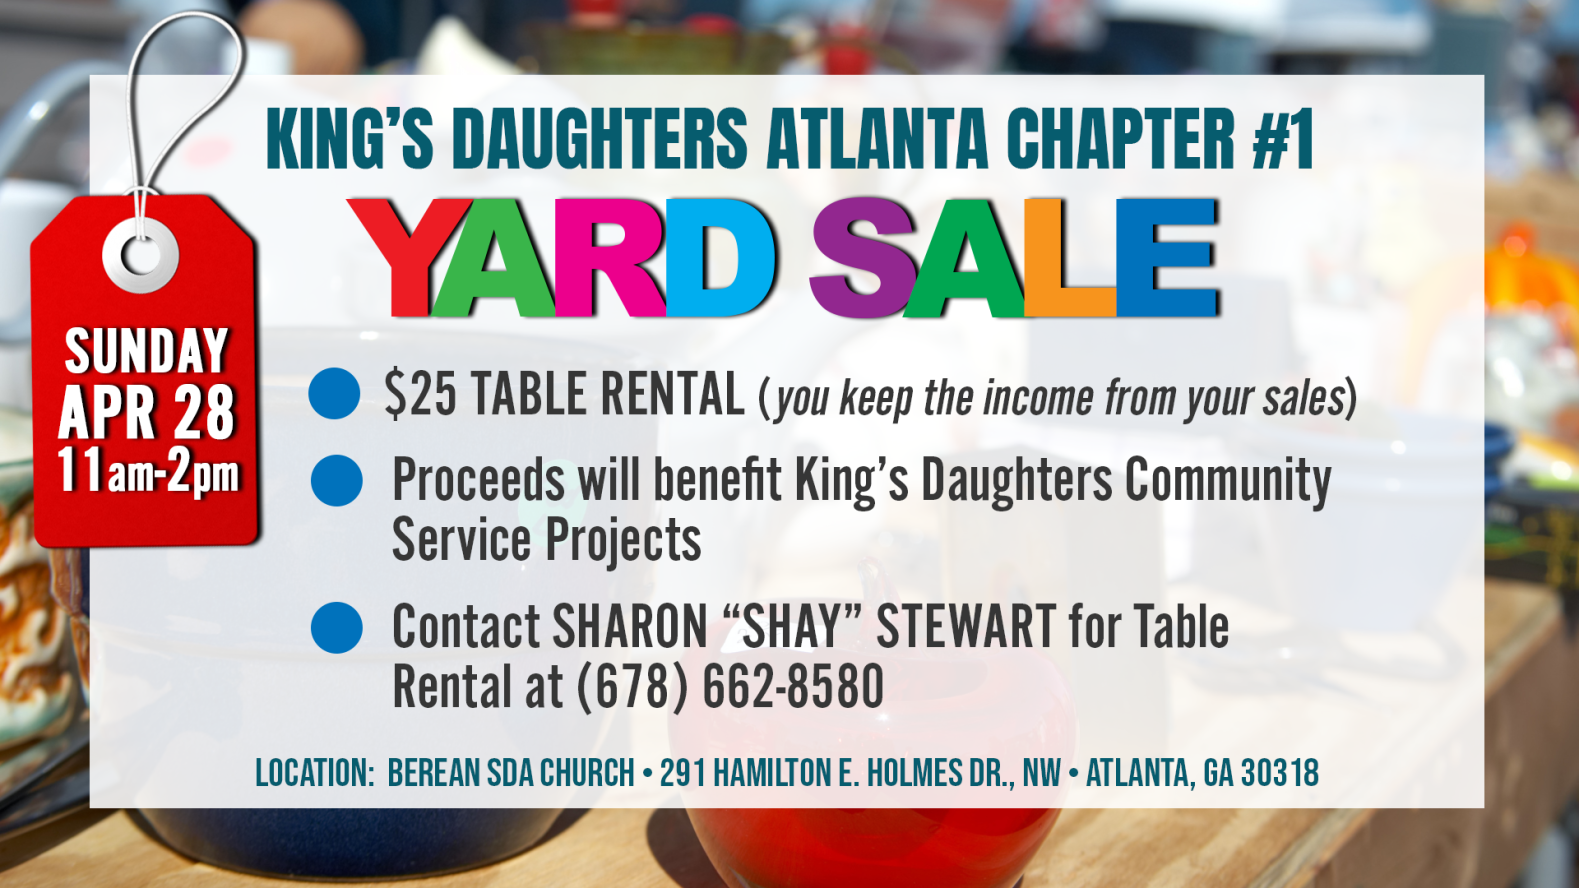 (DATE CHANGE) King's Daughters Atlanta Chapter #1 Yard Sale | Sunday, April 28th 11am to 2pm